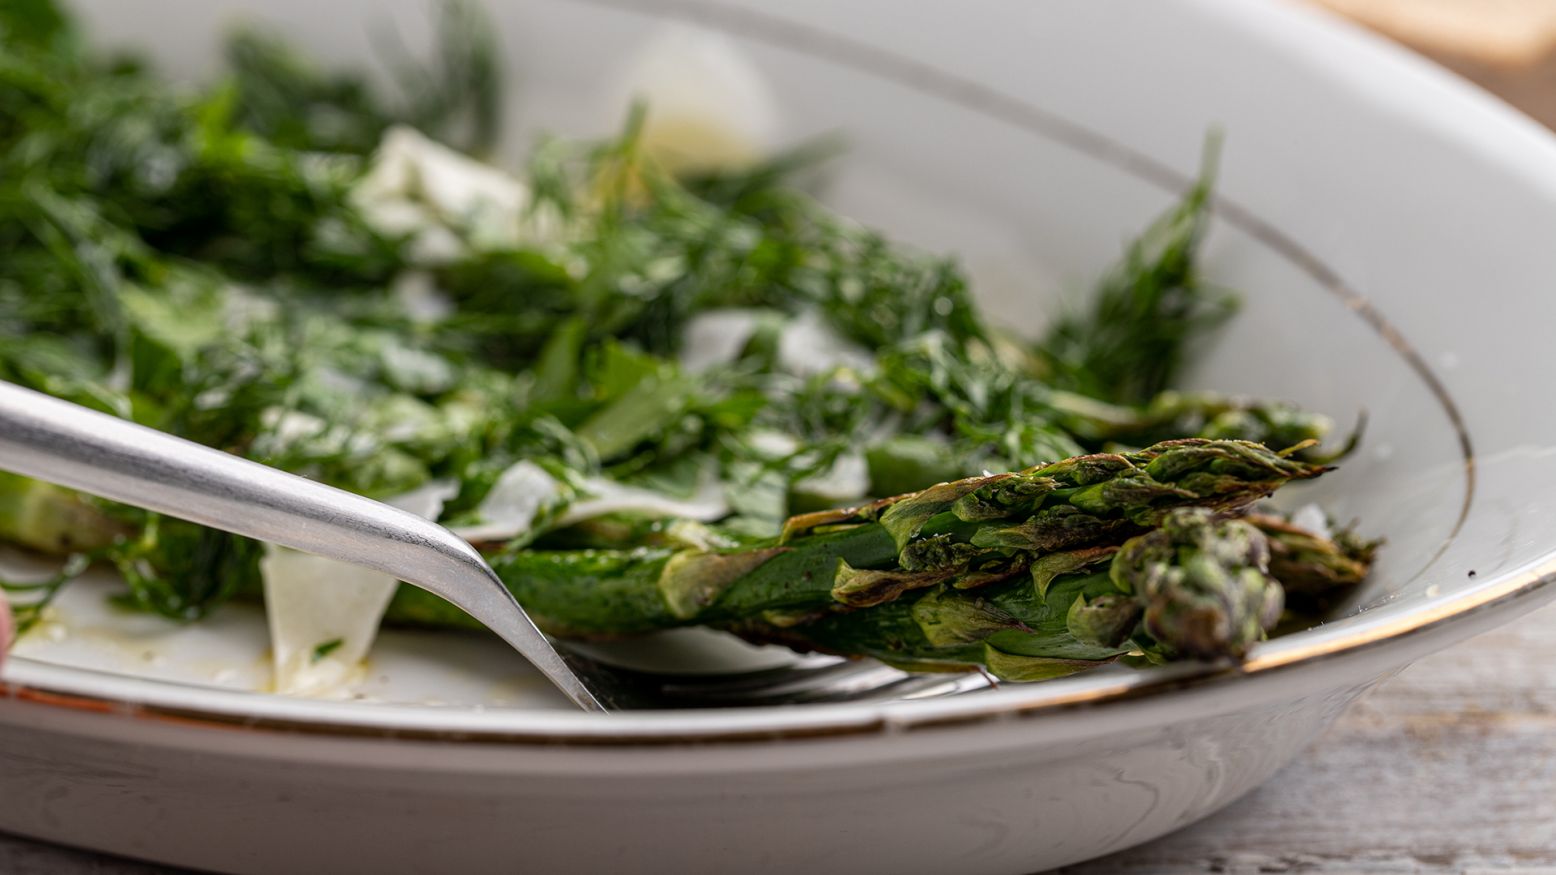 Grilled Asparagus with Dill and Parsley